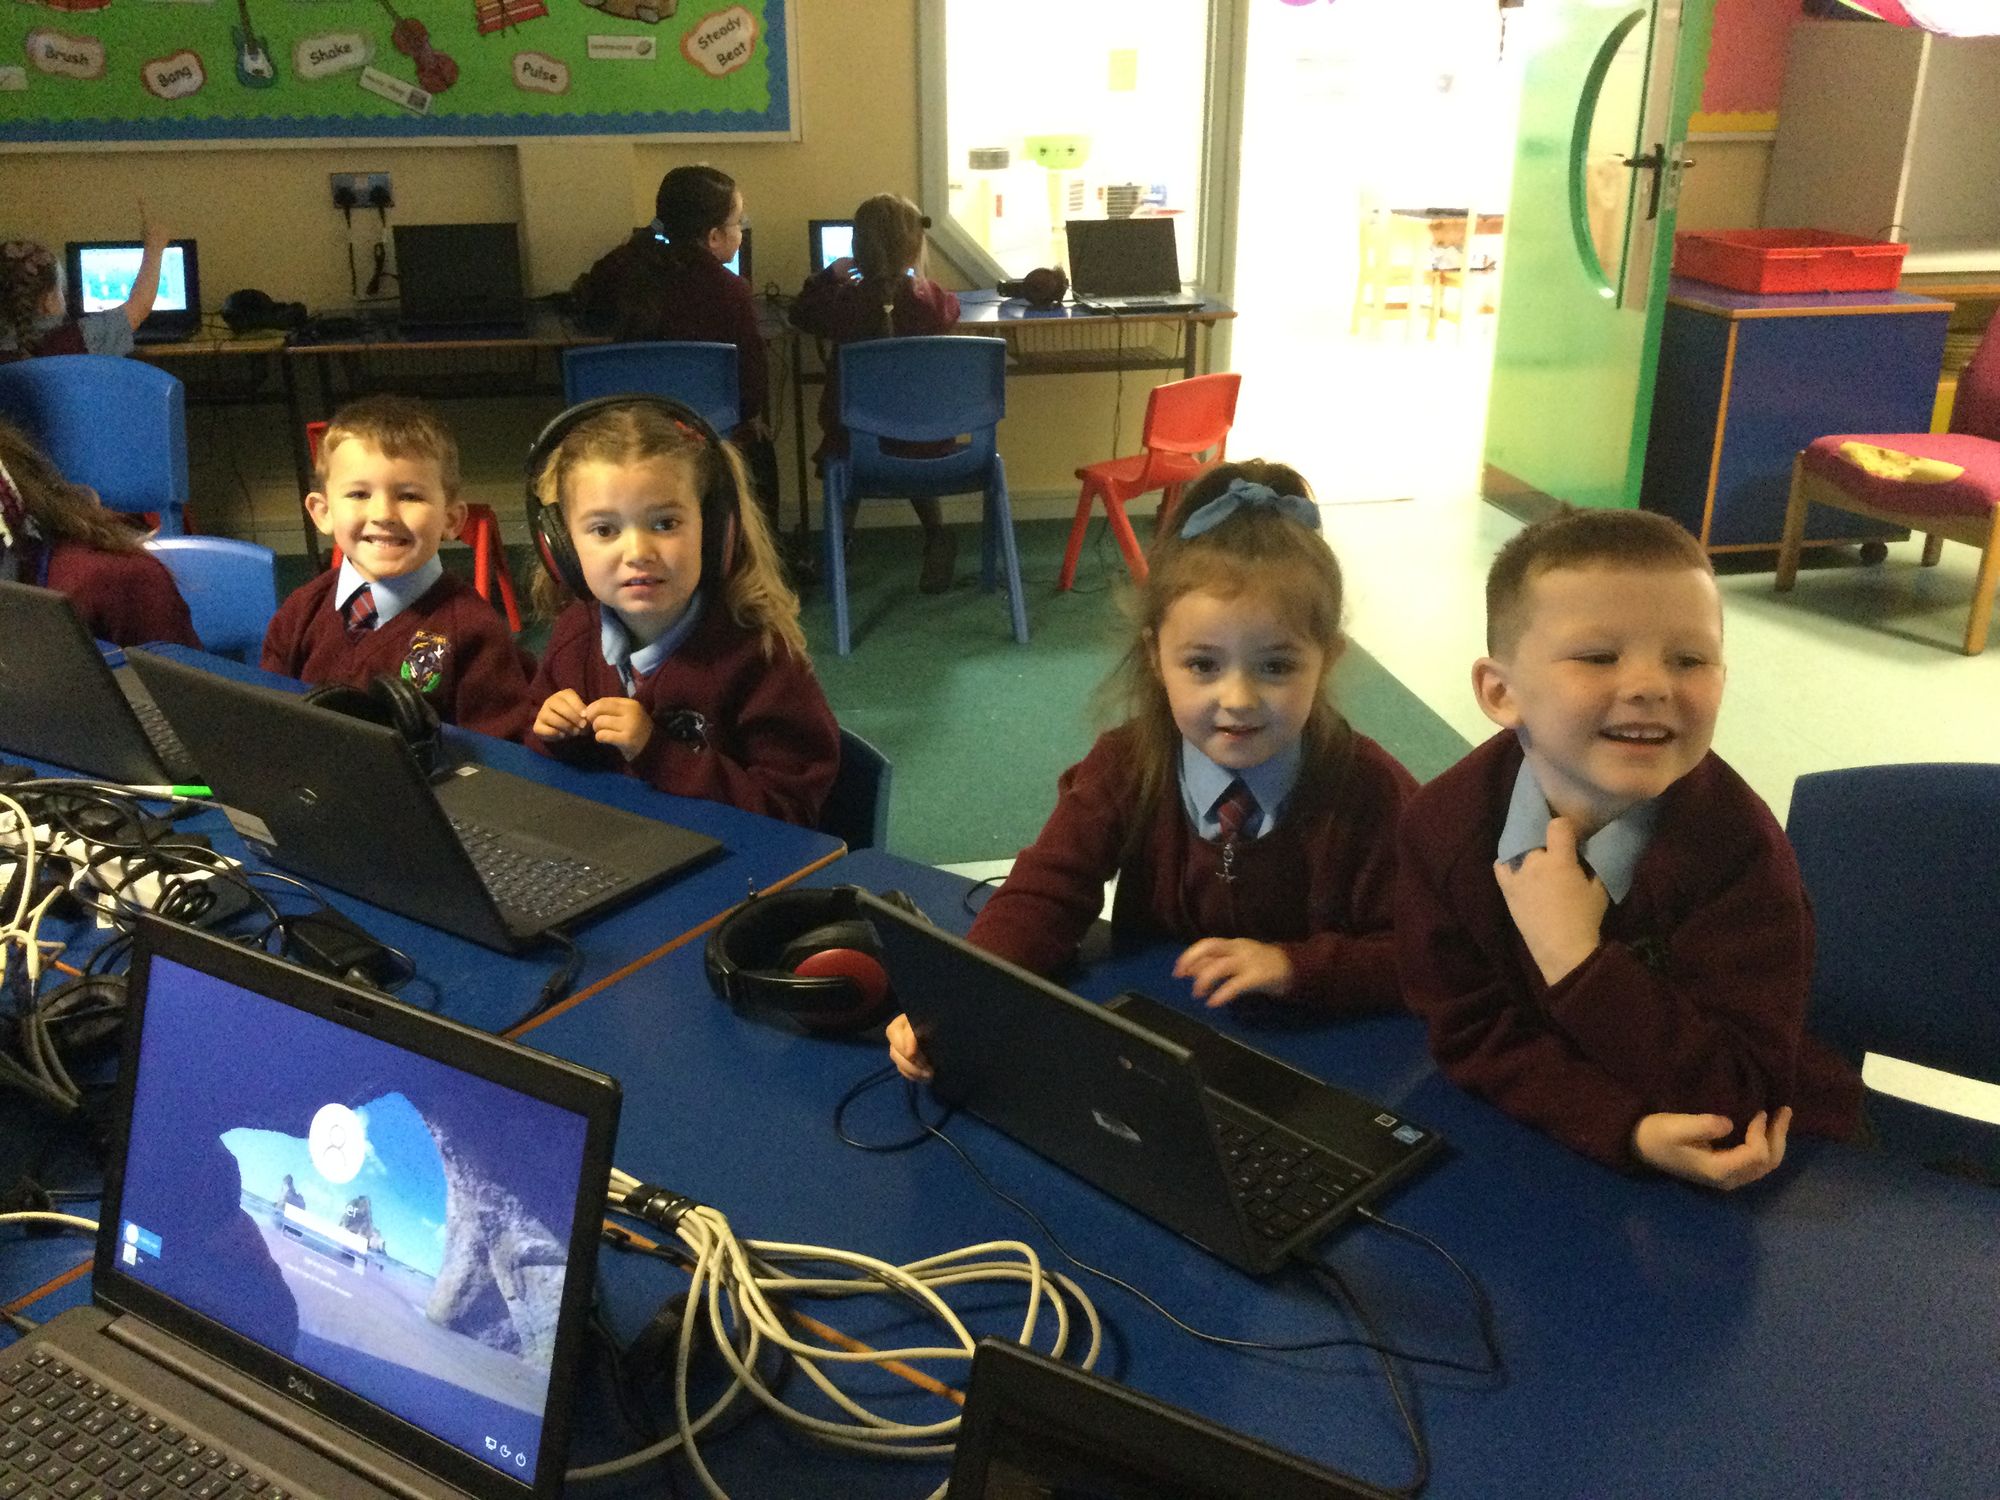 Learning through ICT